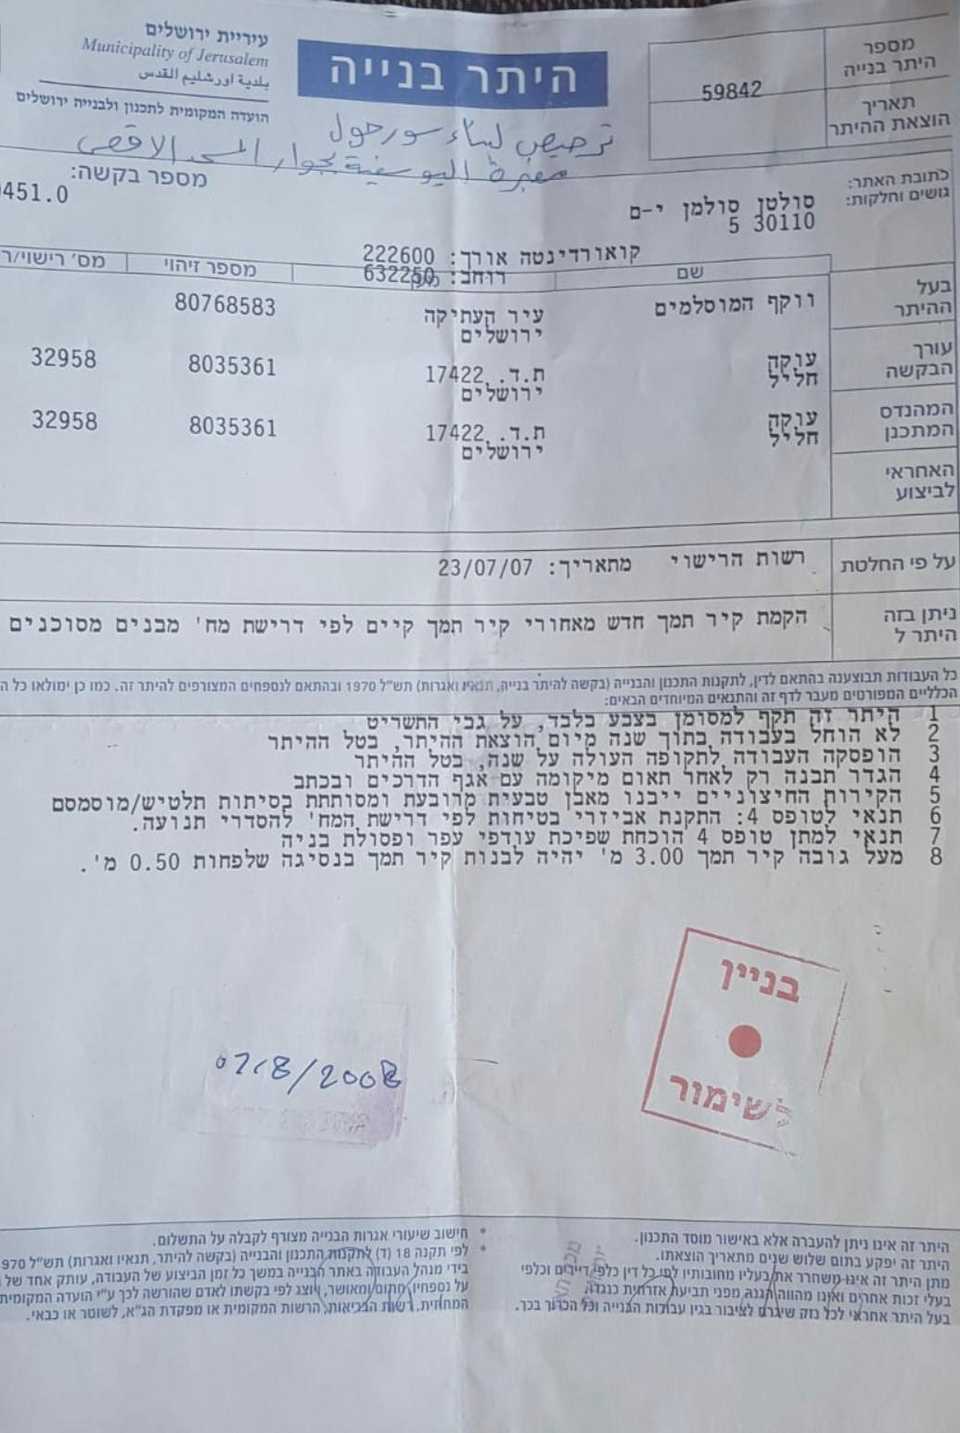 The permission for the renovation of the Yusufiye Cemetery was granted by the Israeli-run Municipality of Jerusalem on July 23, 2007.